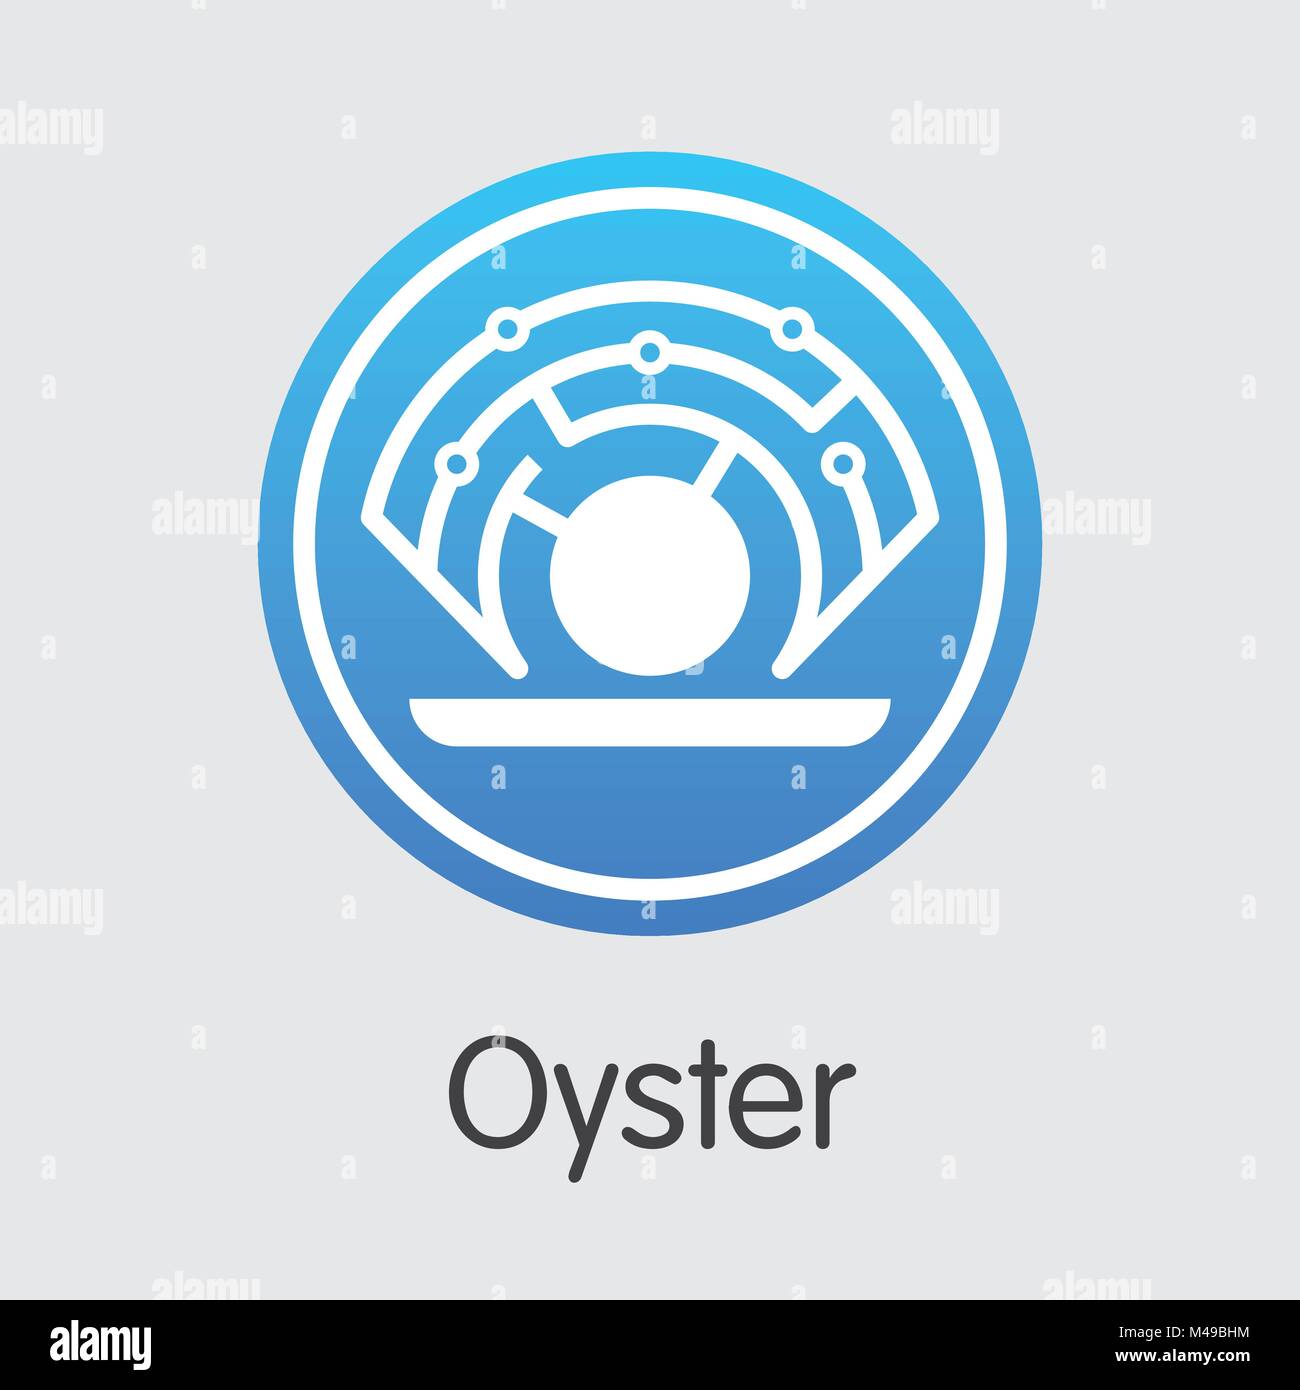 Oyster - Cryptocurrency Coin Pictogram. Stock Vector